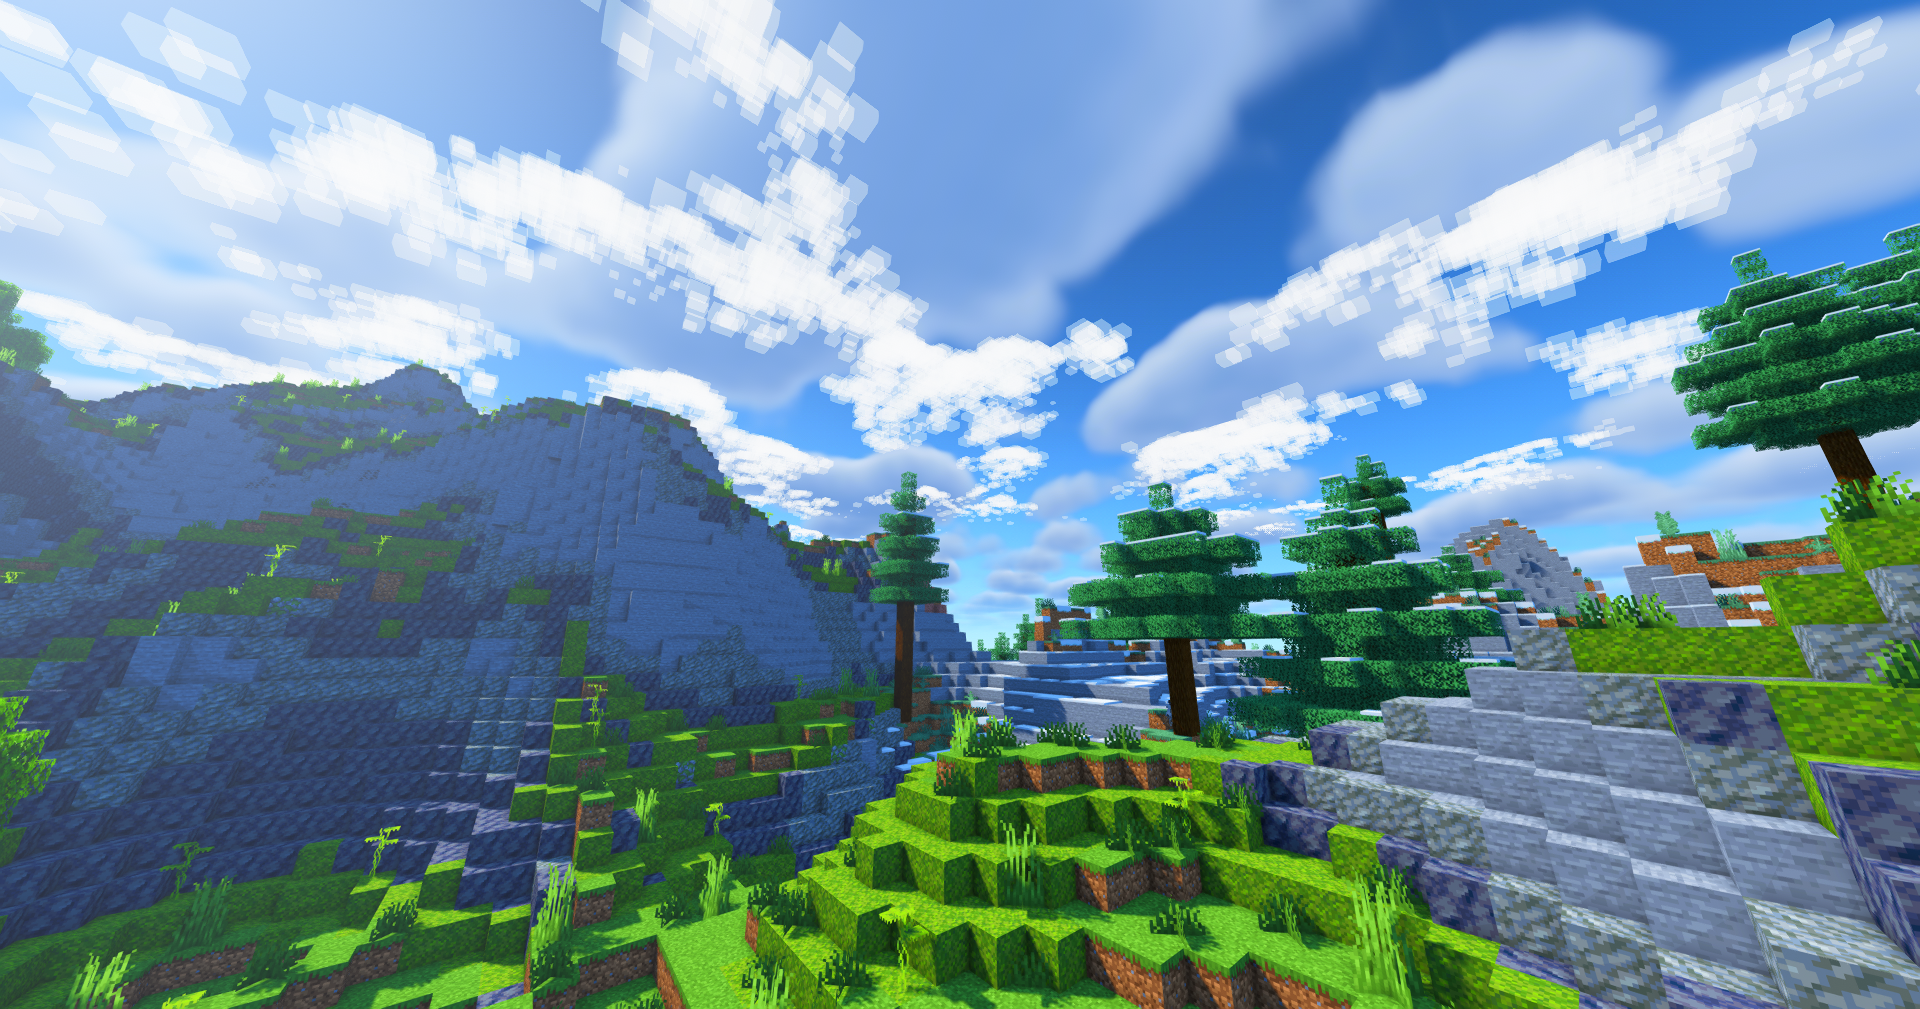 After Shaders